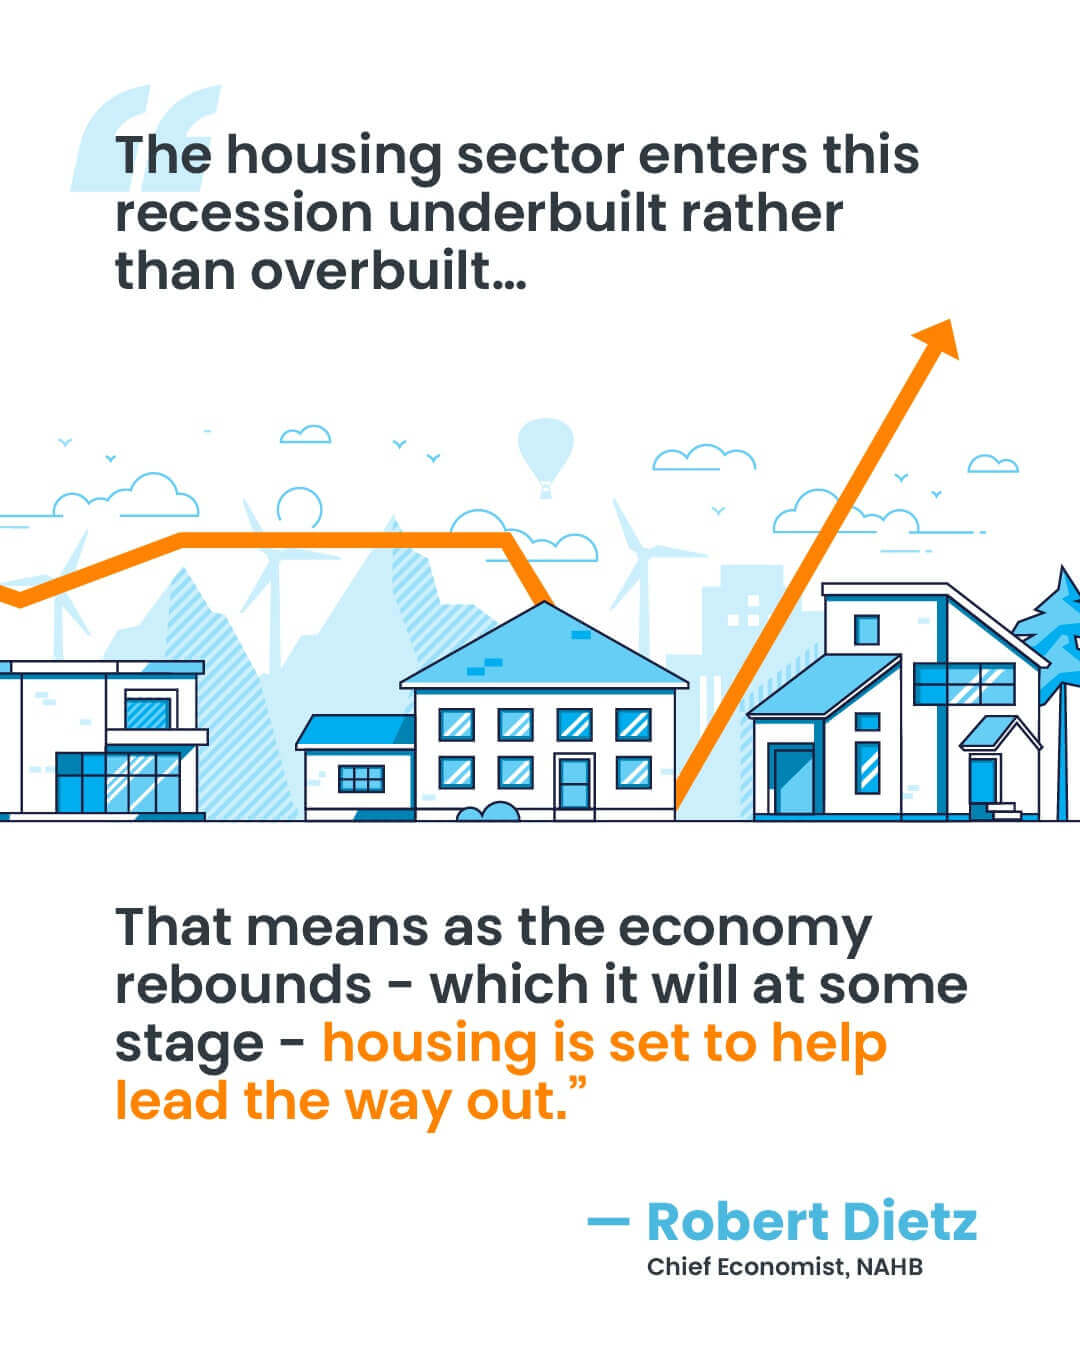 The Housing Market Is Positioned to Help the Economy Recover | Simplifying The Market